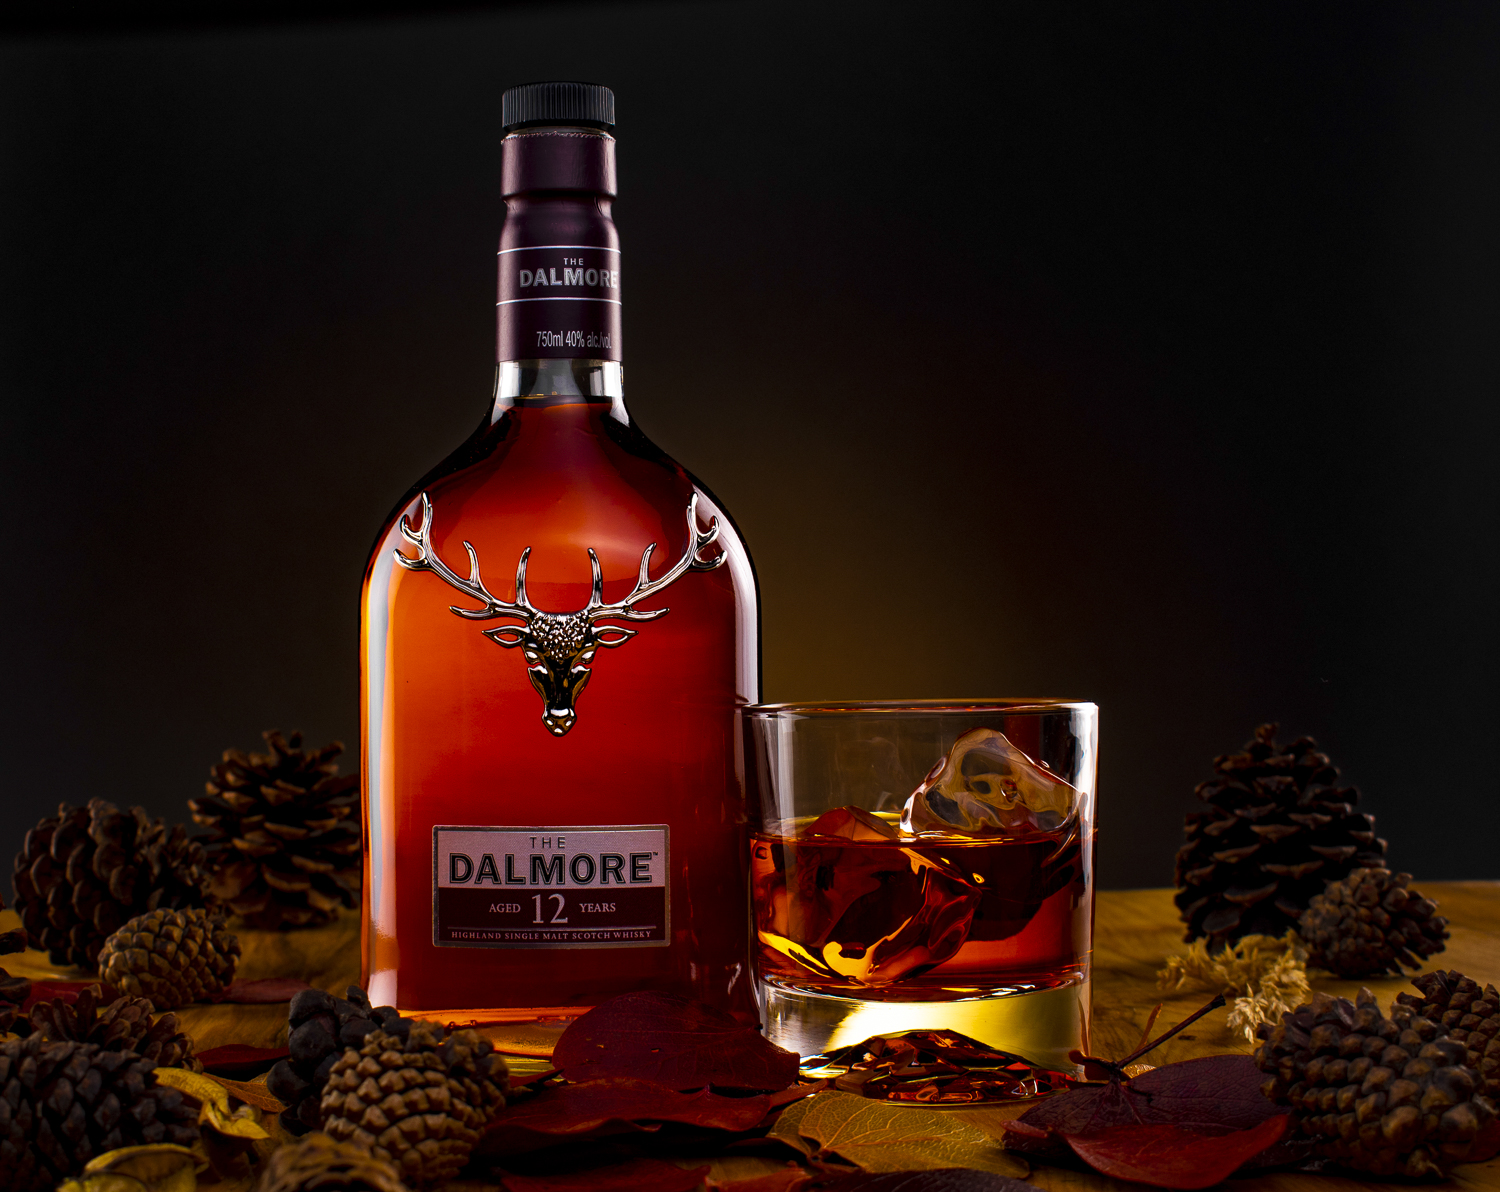 The Dalmore by Kevin Cady